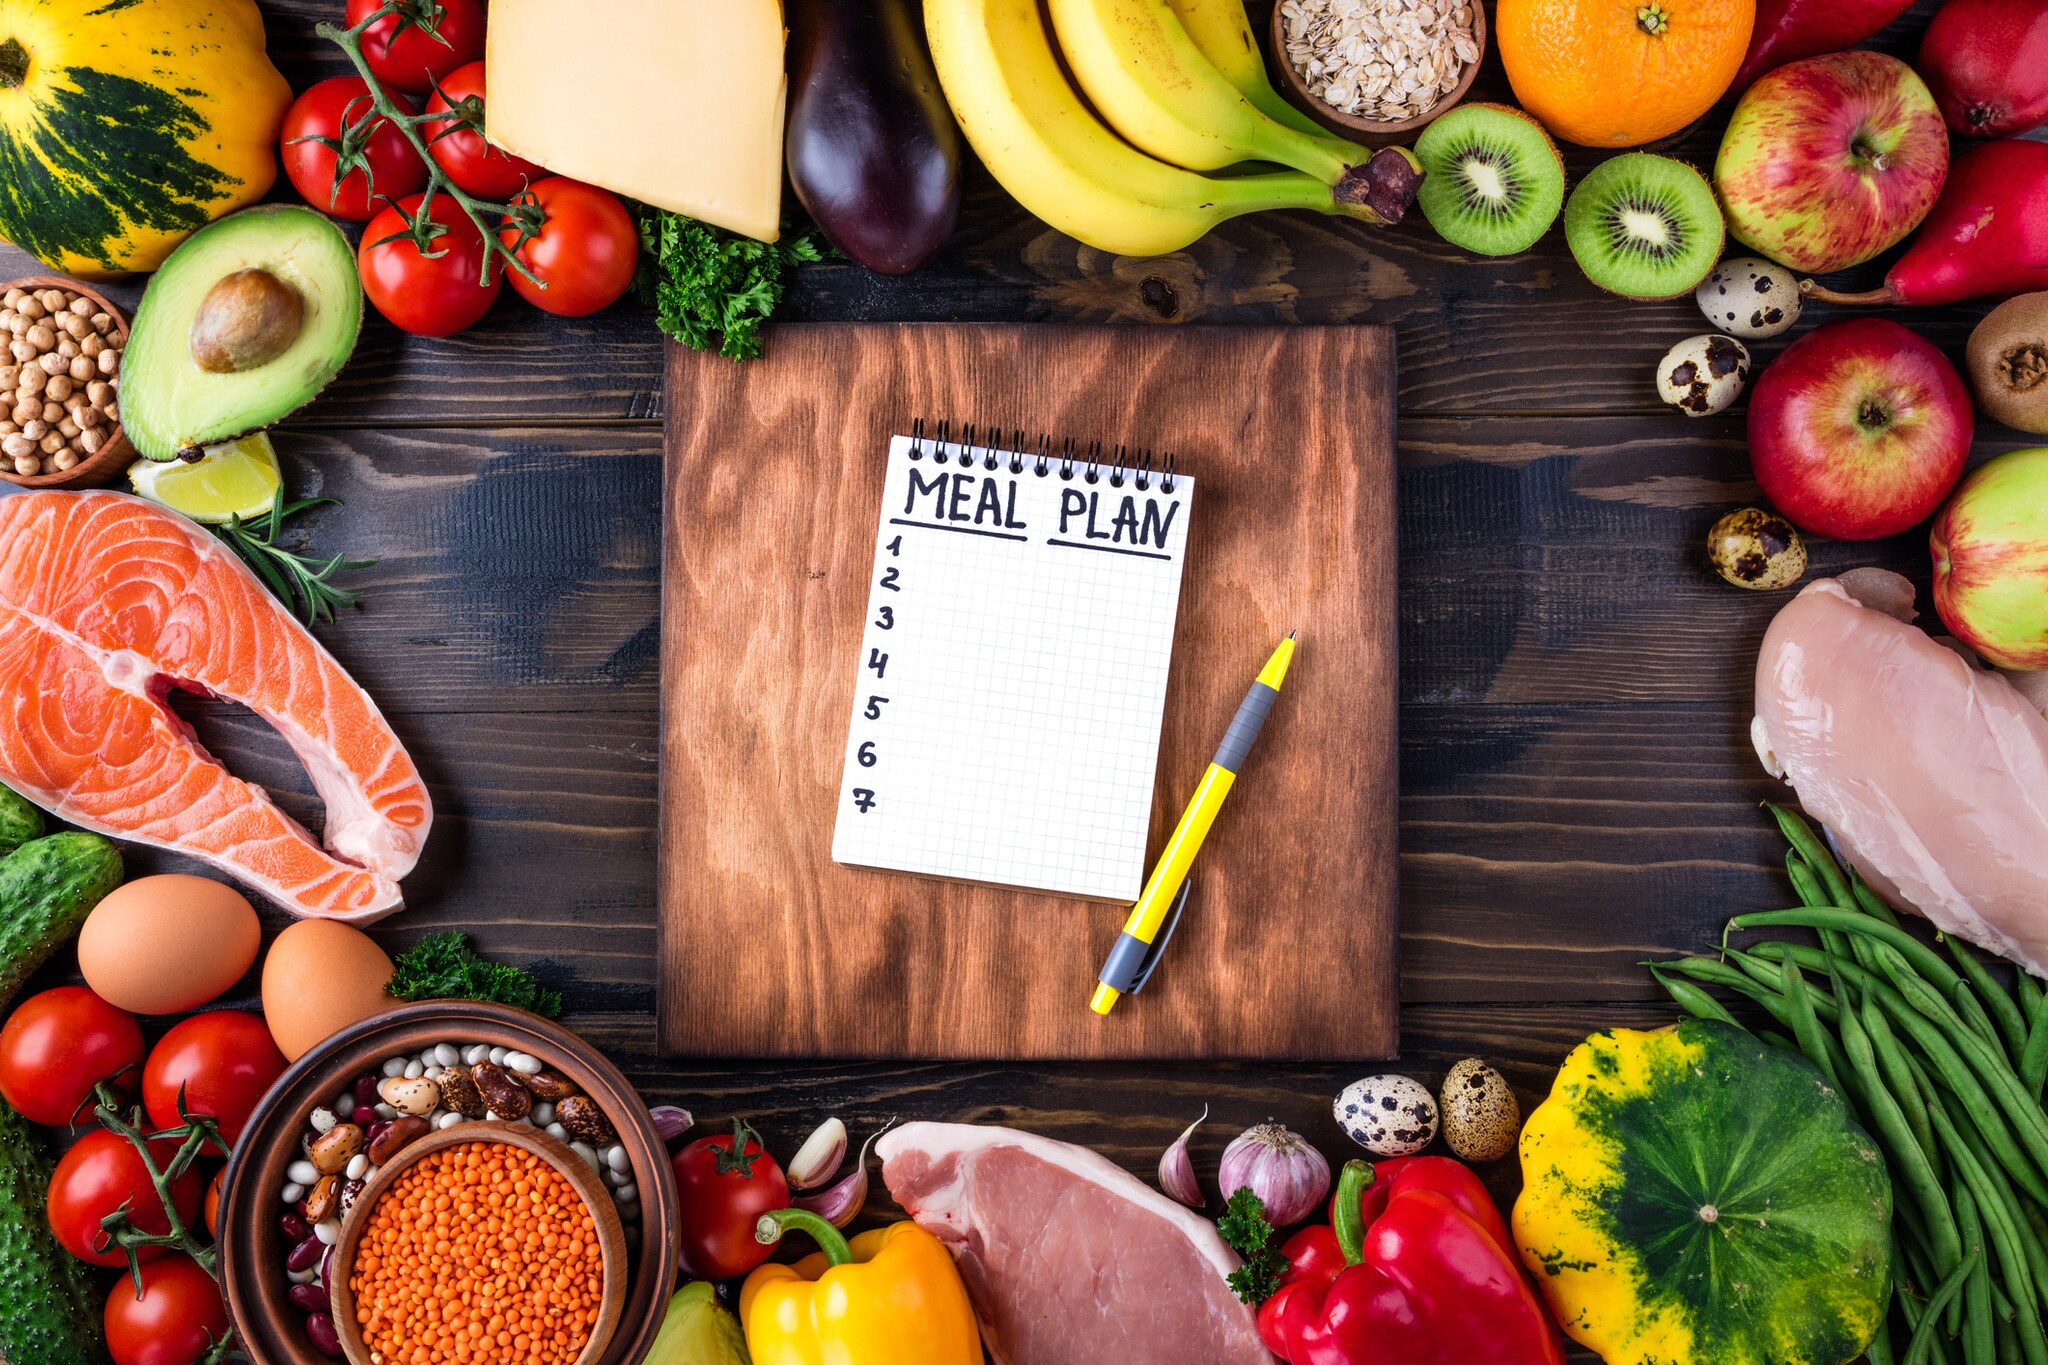 Top view of a meal plan notebook in the center of a wooden table surrounded by fresh vegetables, fruits, meat and fish.